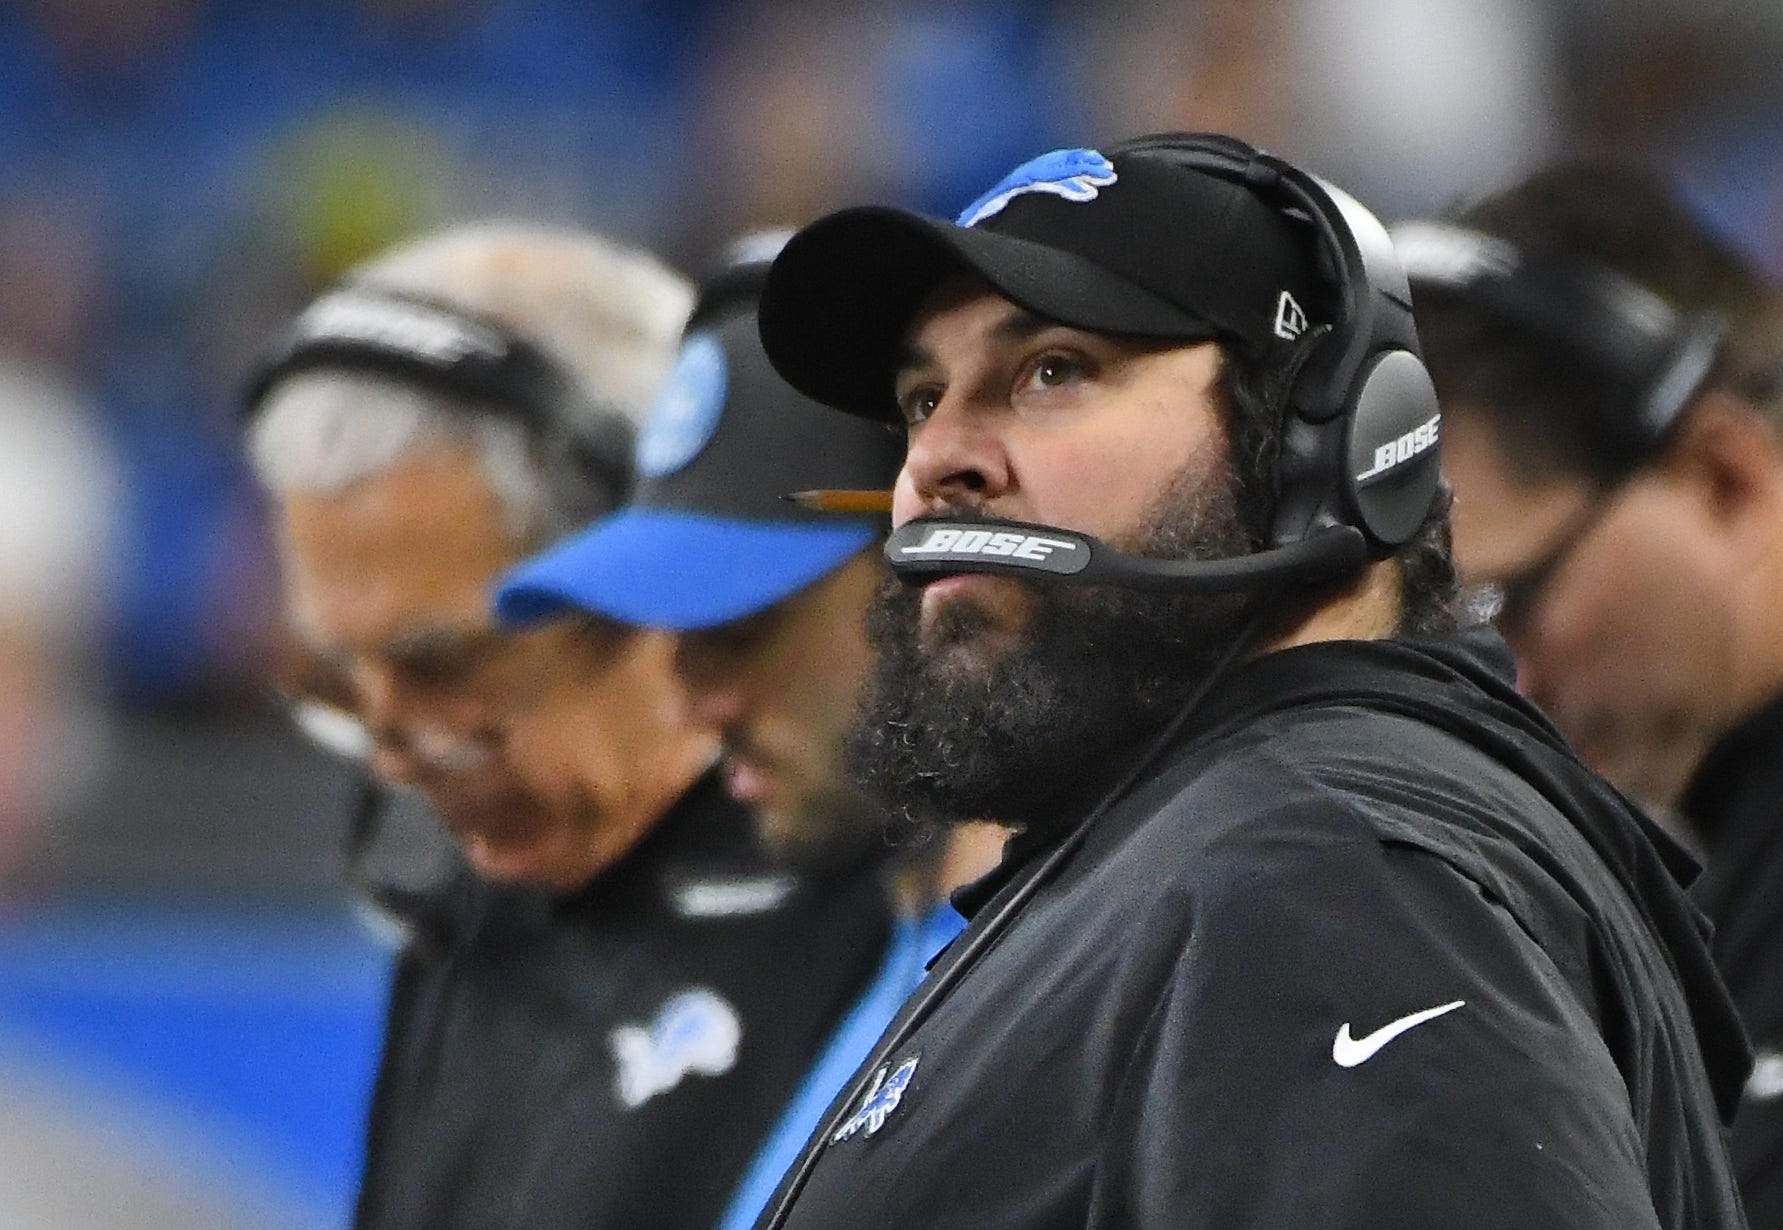 Matt Patricia, head coach: Patricia never let anyone forget it, but he wasn't wrong when he constantly praised the team's fight. As bad as things got during the nine-game losing streak to end the season, the Lions never quit on their coach, nearly knocking off the Packers in the finale with a patchwork roster. 
But the story of the season was being close and coming up short. The Lions blew lead after lead during the season with an alarming inability to finish games. Sure, you can find examples of penalties or execution errors that contributed to each defeat, but the consistent failure to get over the hump is a direct indictment of Detroit's coaching, at every position, in every situation. Grade: D